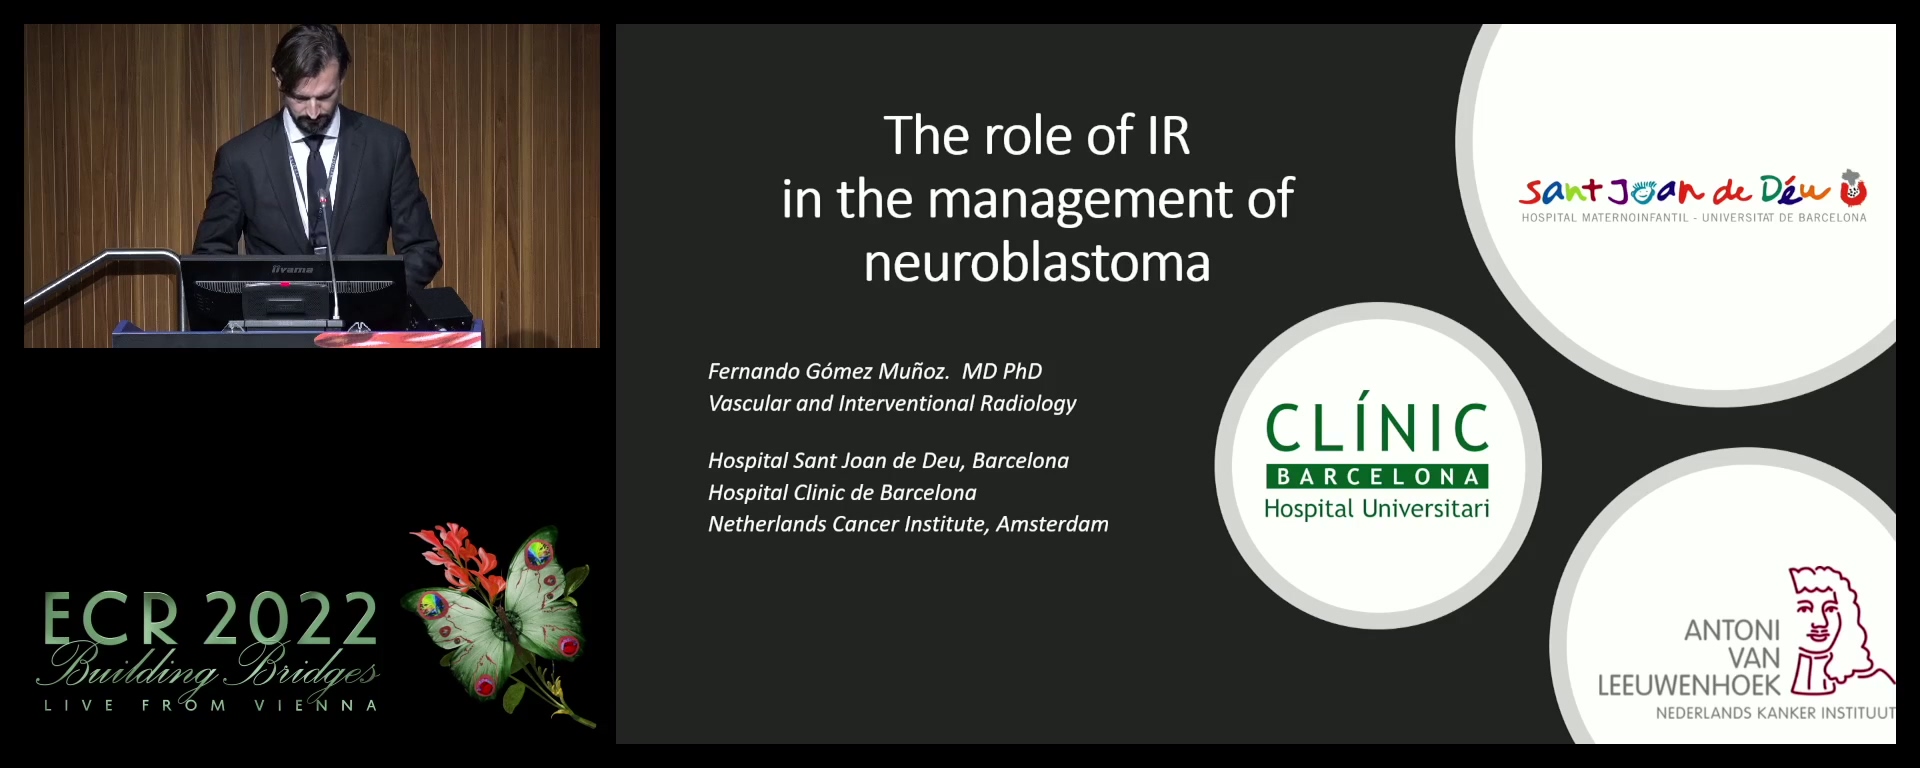 Interventional radiology in treatment of neuroblastoma: the interventional radiologist's perspective